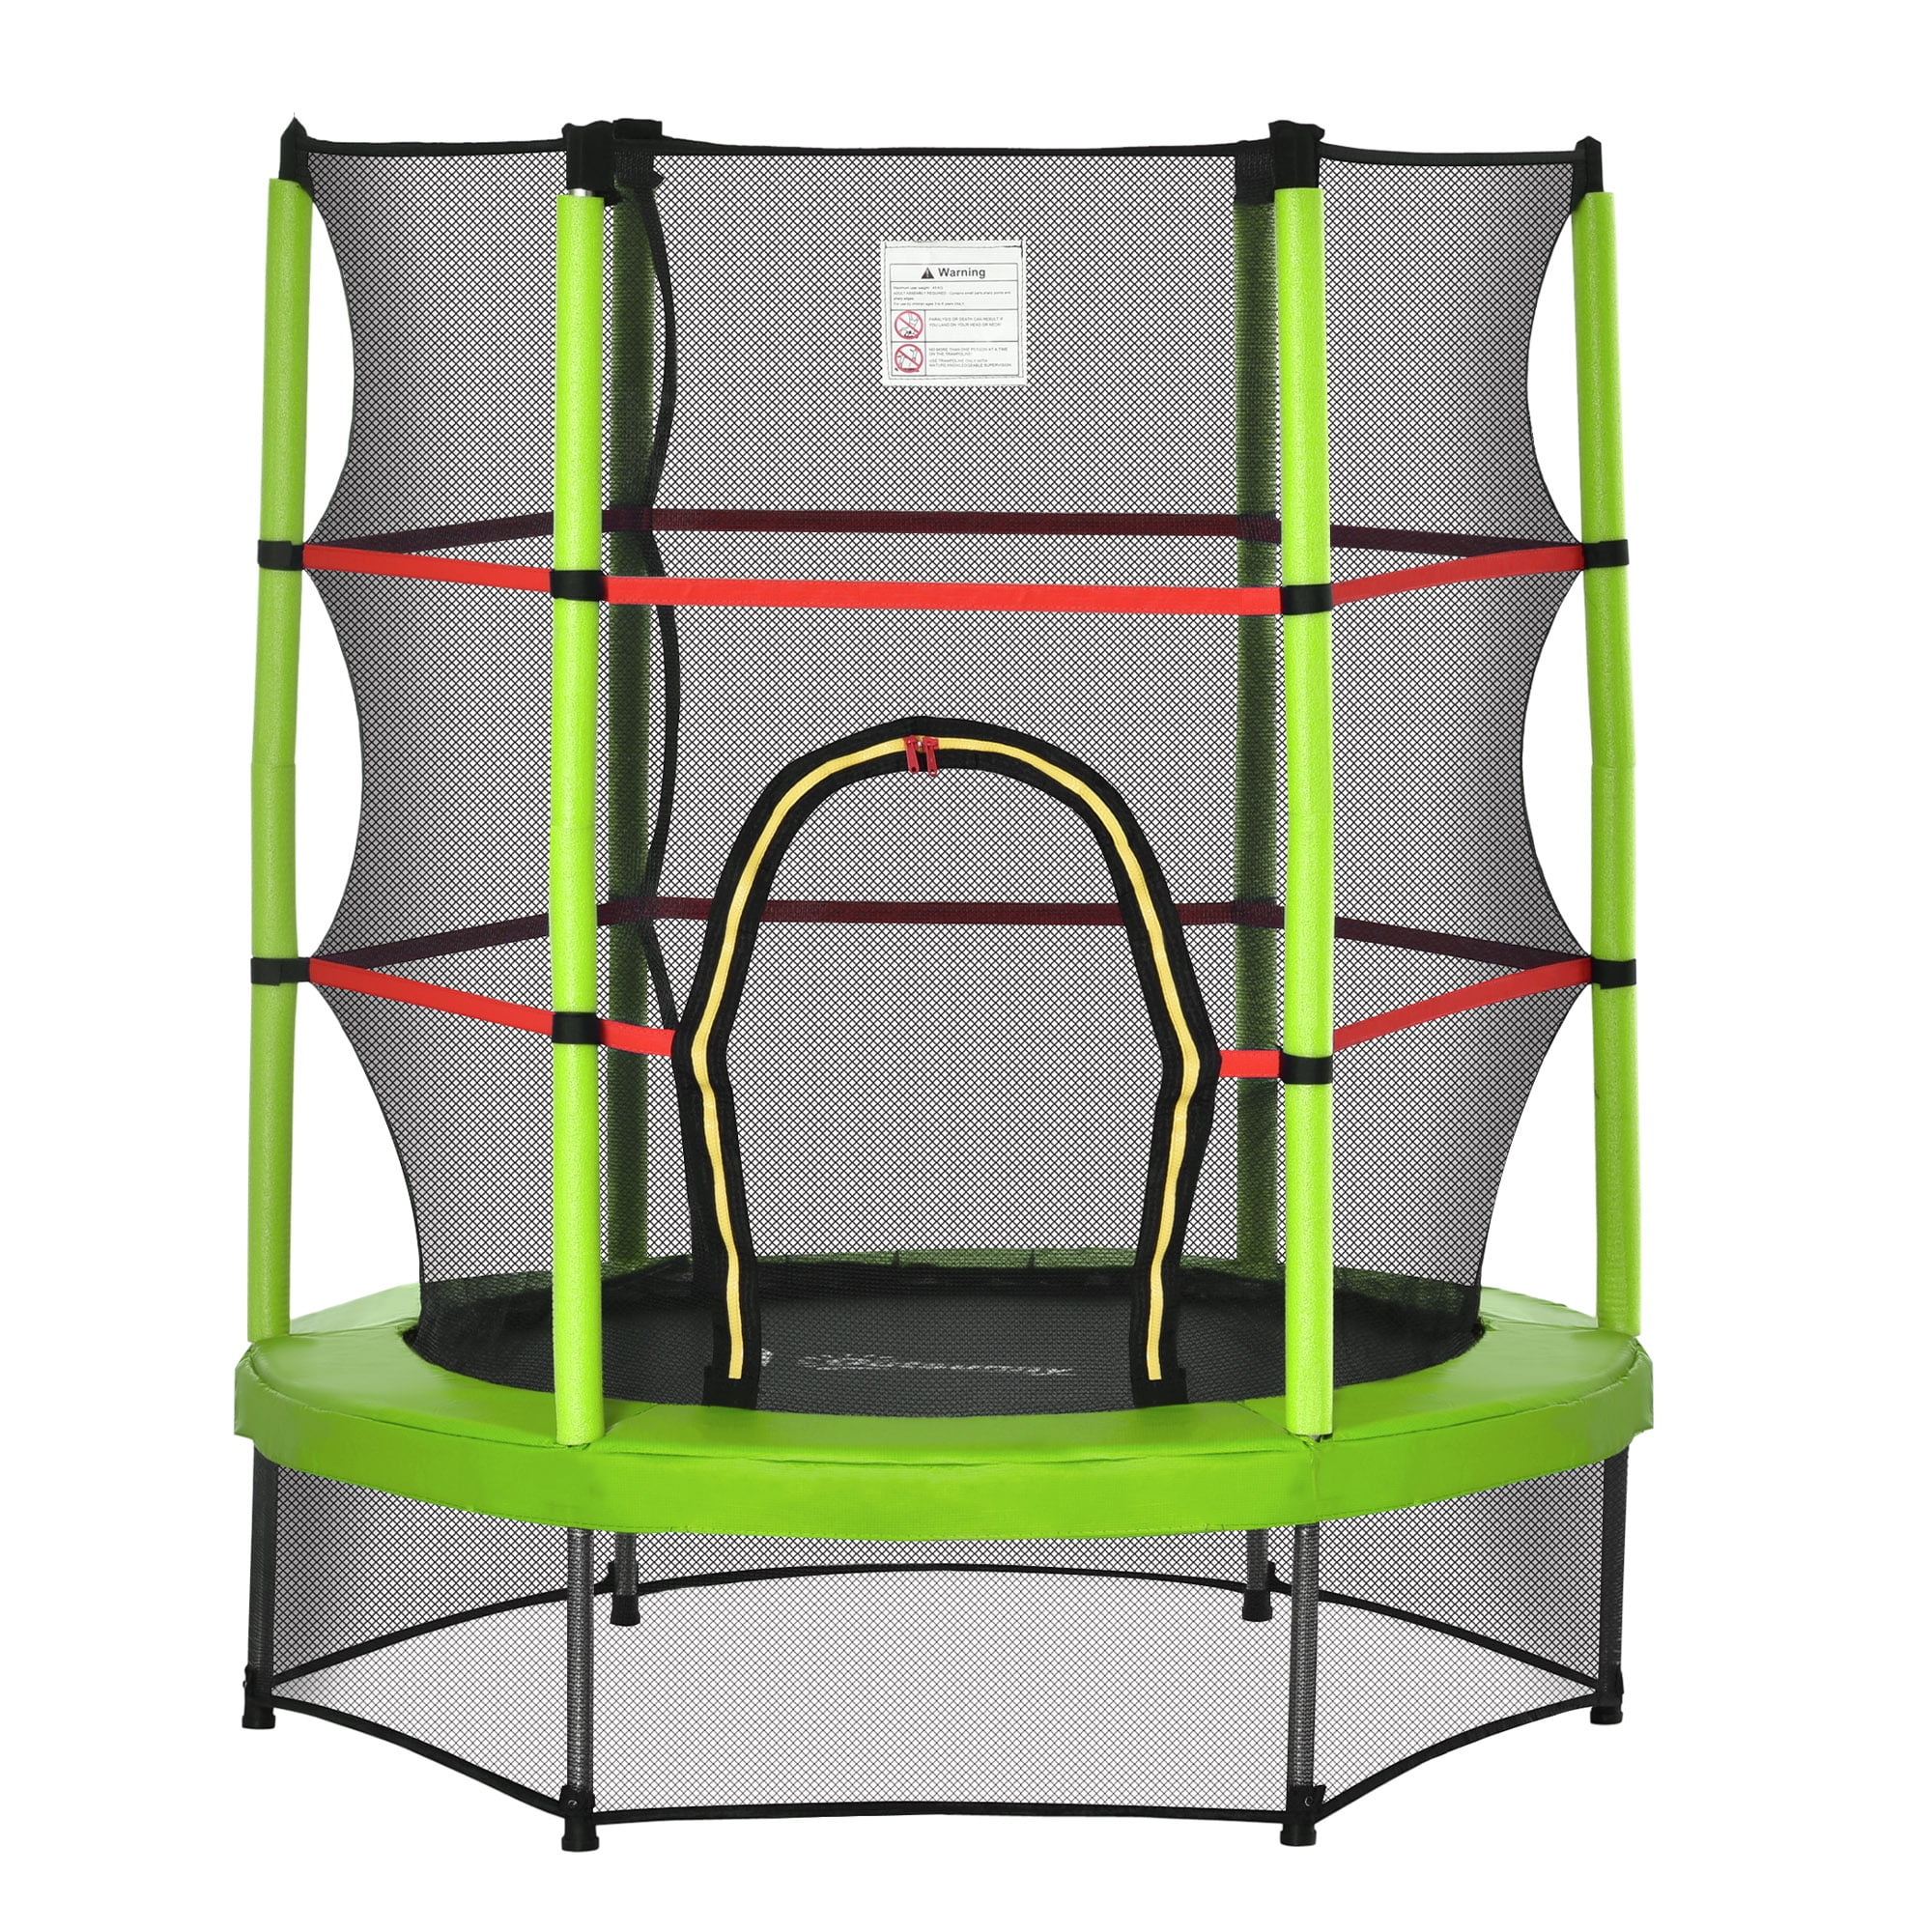 Details about   55" Mini Trampoline 4.5ft Exercise Jumping Trampoline Indoor/ Outdoor Kids Toy 